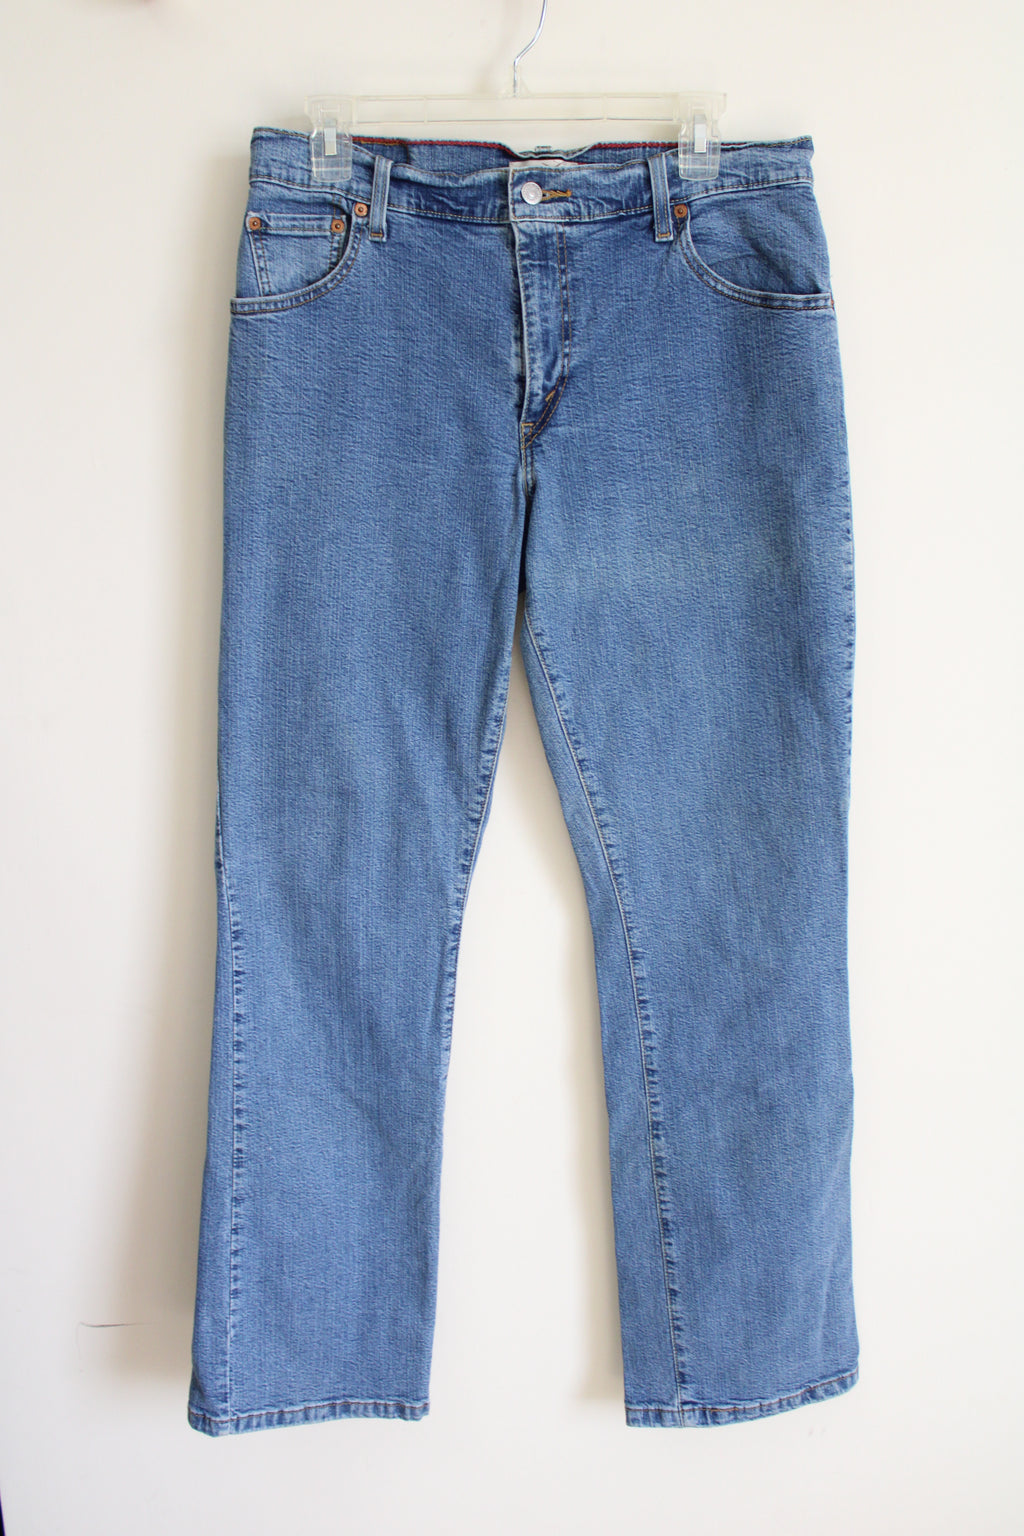 Levi's Relaxed Bootcut 550 Jeans | 12